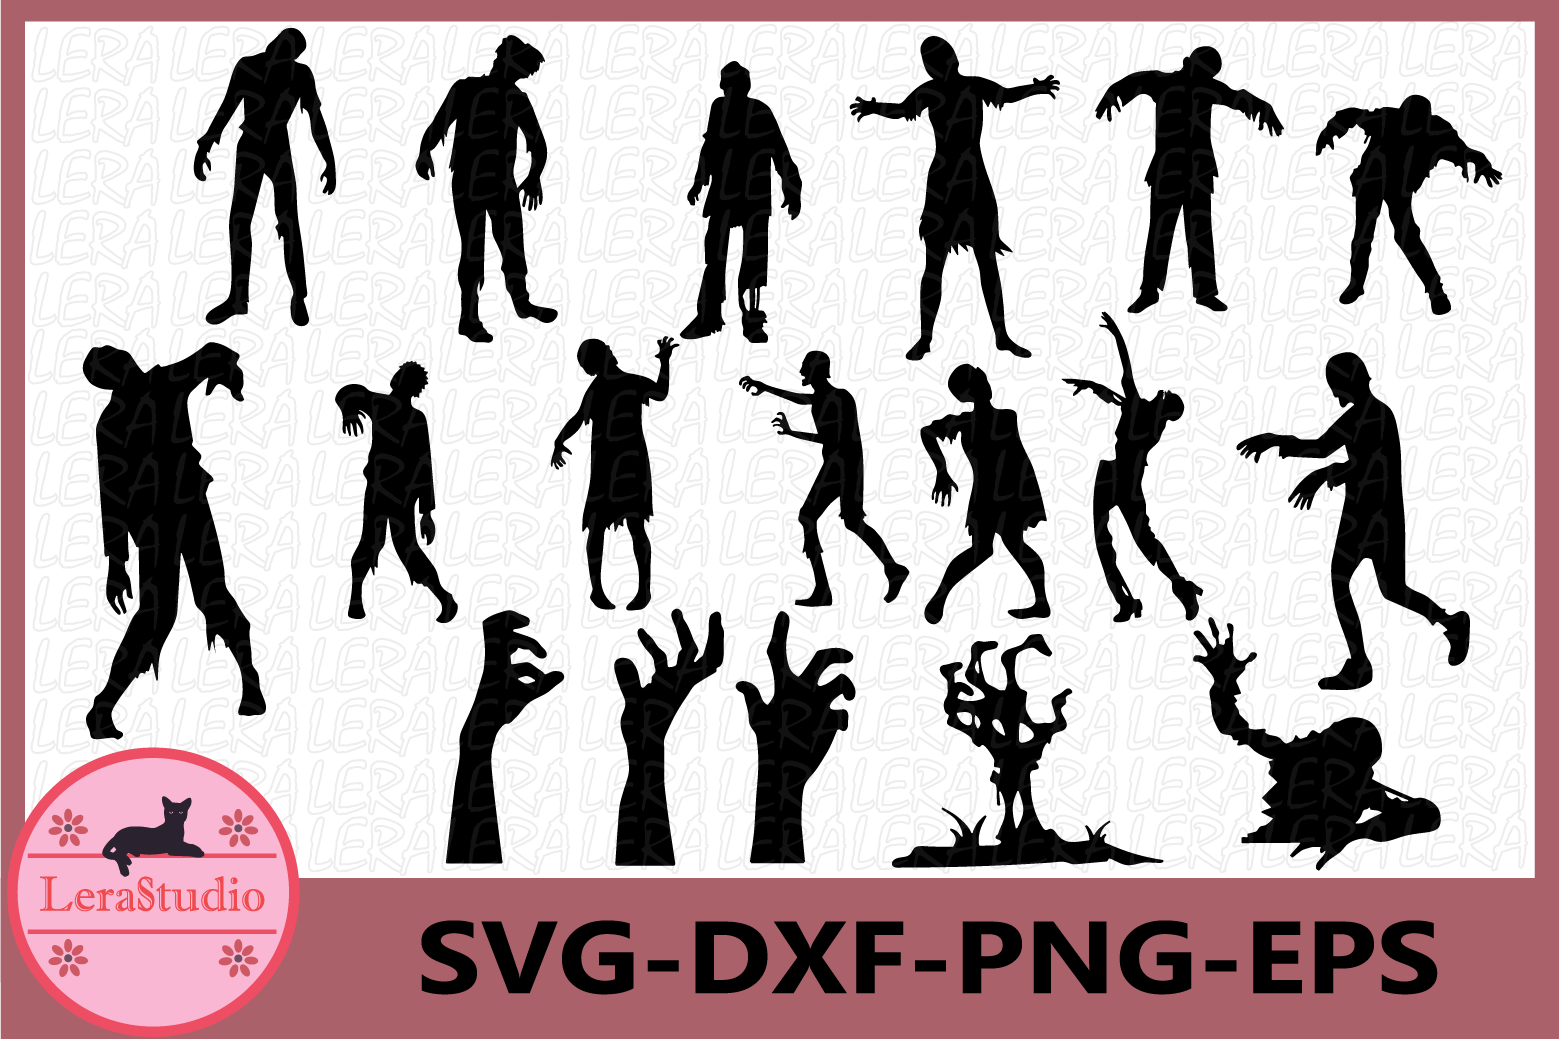 Download Zombies Svg, Zombie Svg, Halloween Svg, Zombie Silhouettes